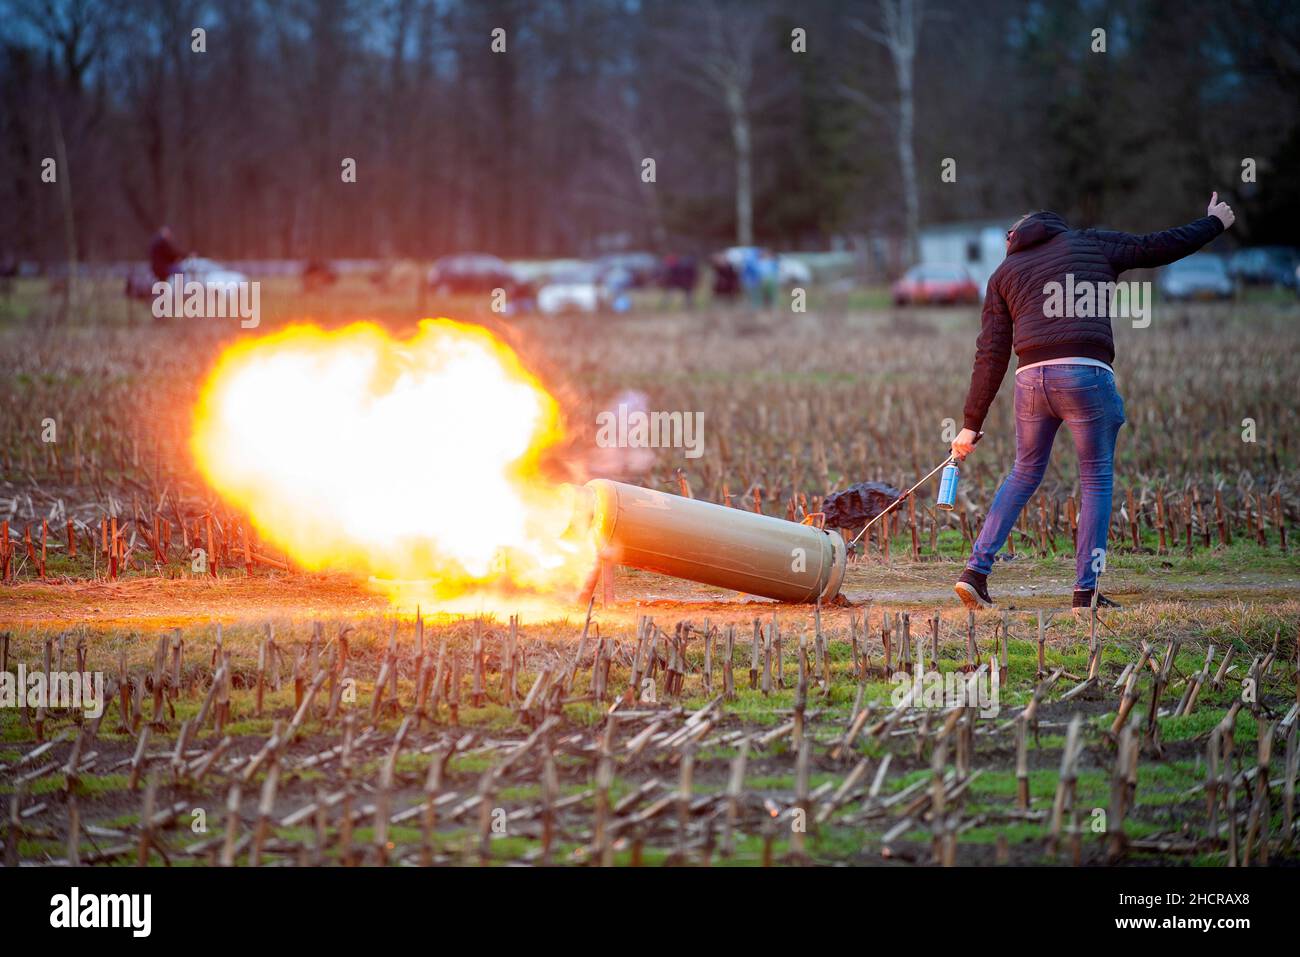 Carbide shooting is a tradition on new years eve in the eastern part of the Netherlands. Stock Photo